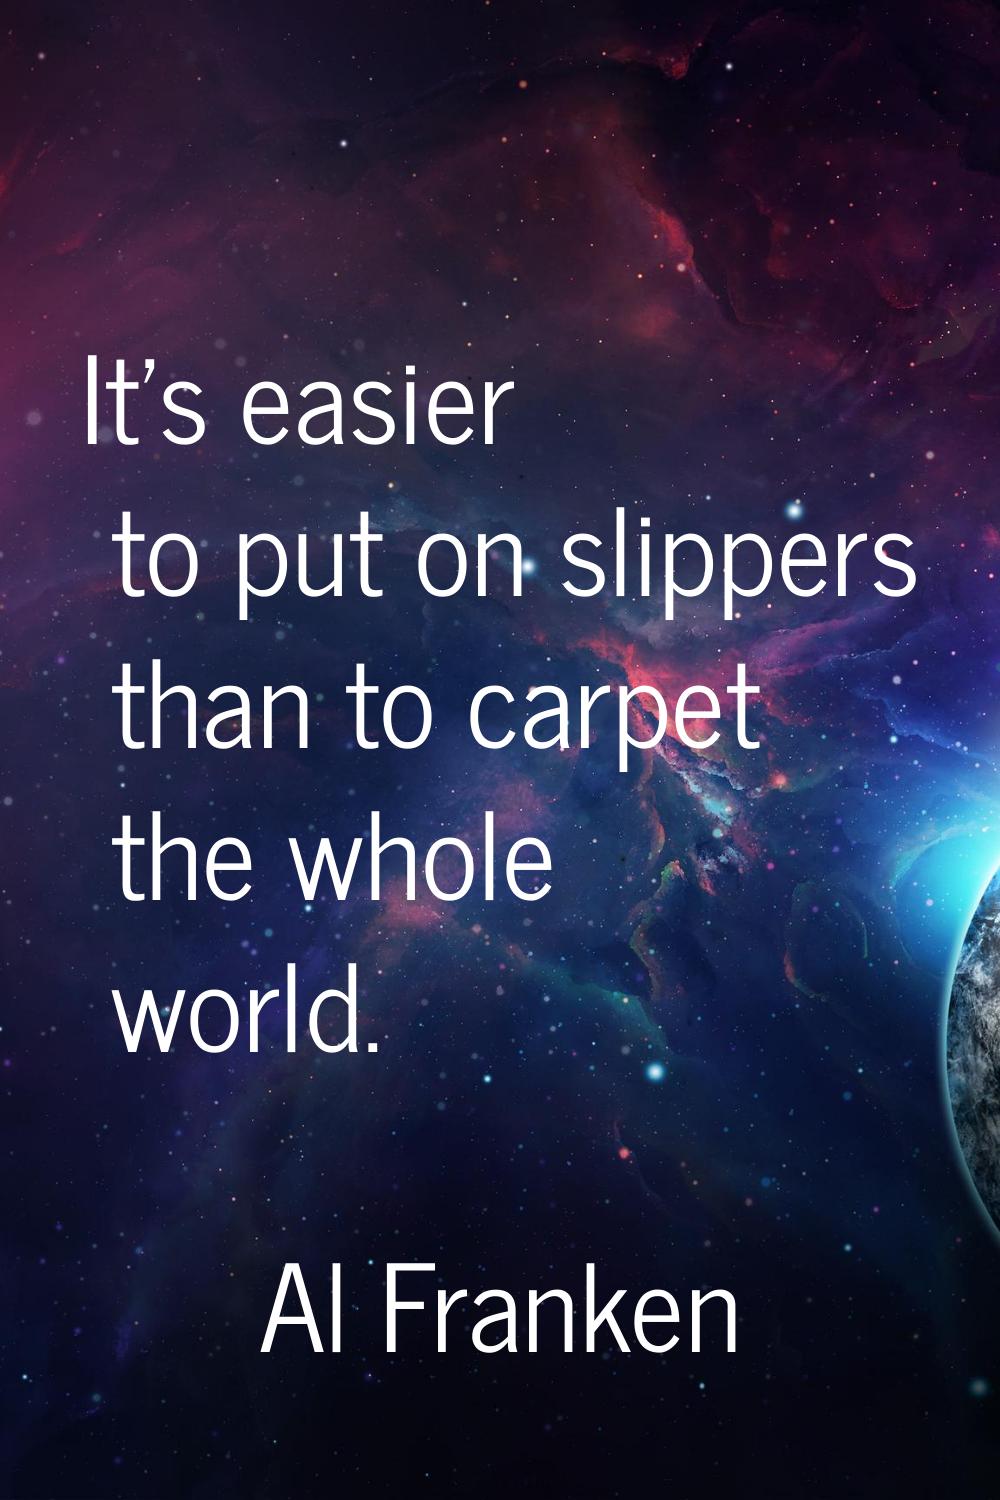 It's easier to put on slippers than to carpet the whole world.